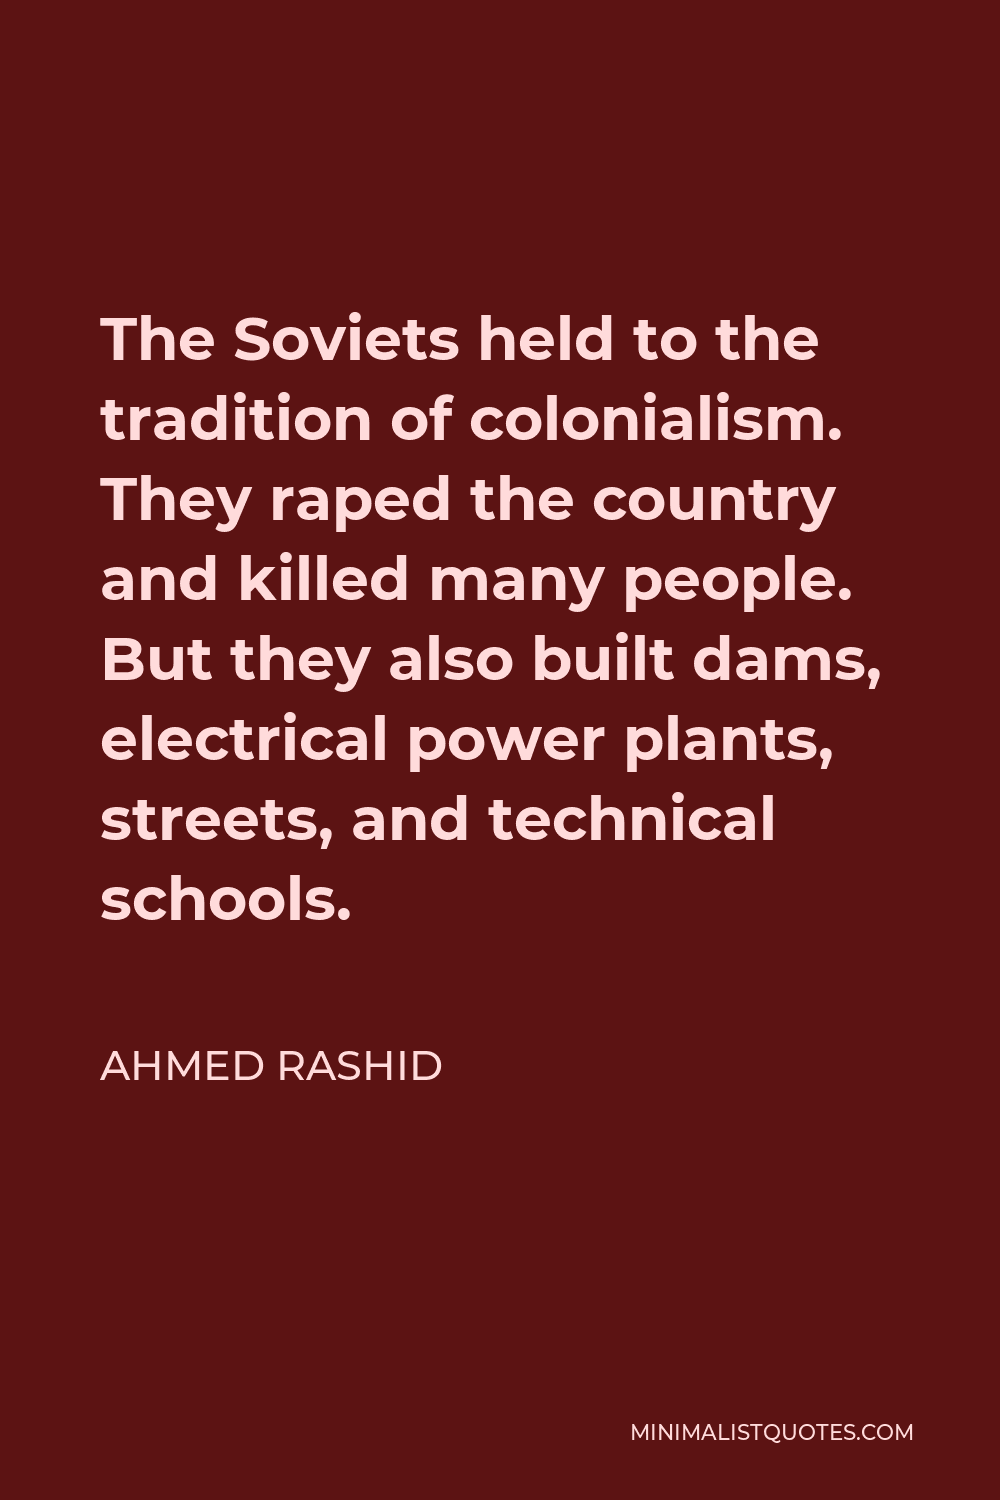 Ahmed Rashid Quote - The Soviets held to the tradition of colonialism. They raped the country and killed many people. But they also built dams, electrical power plants, streets, and technical schools.